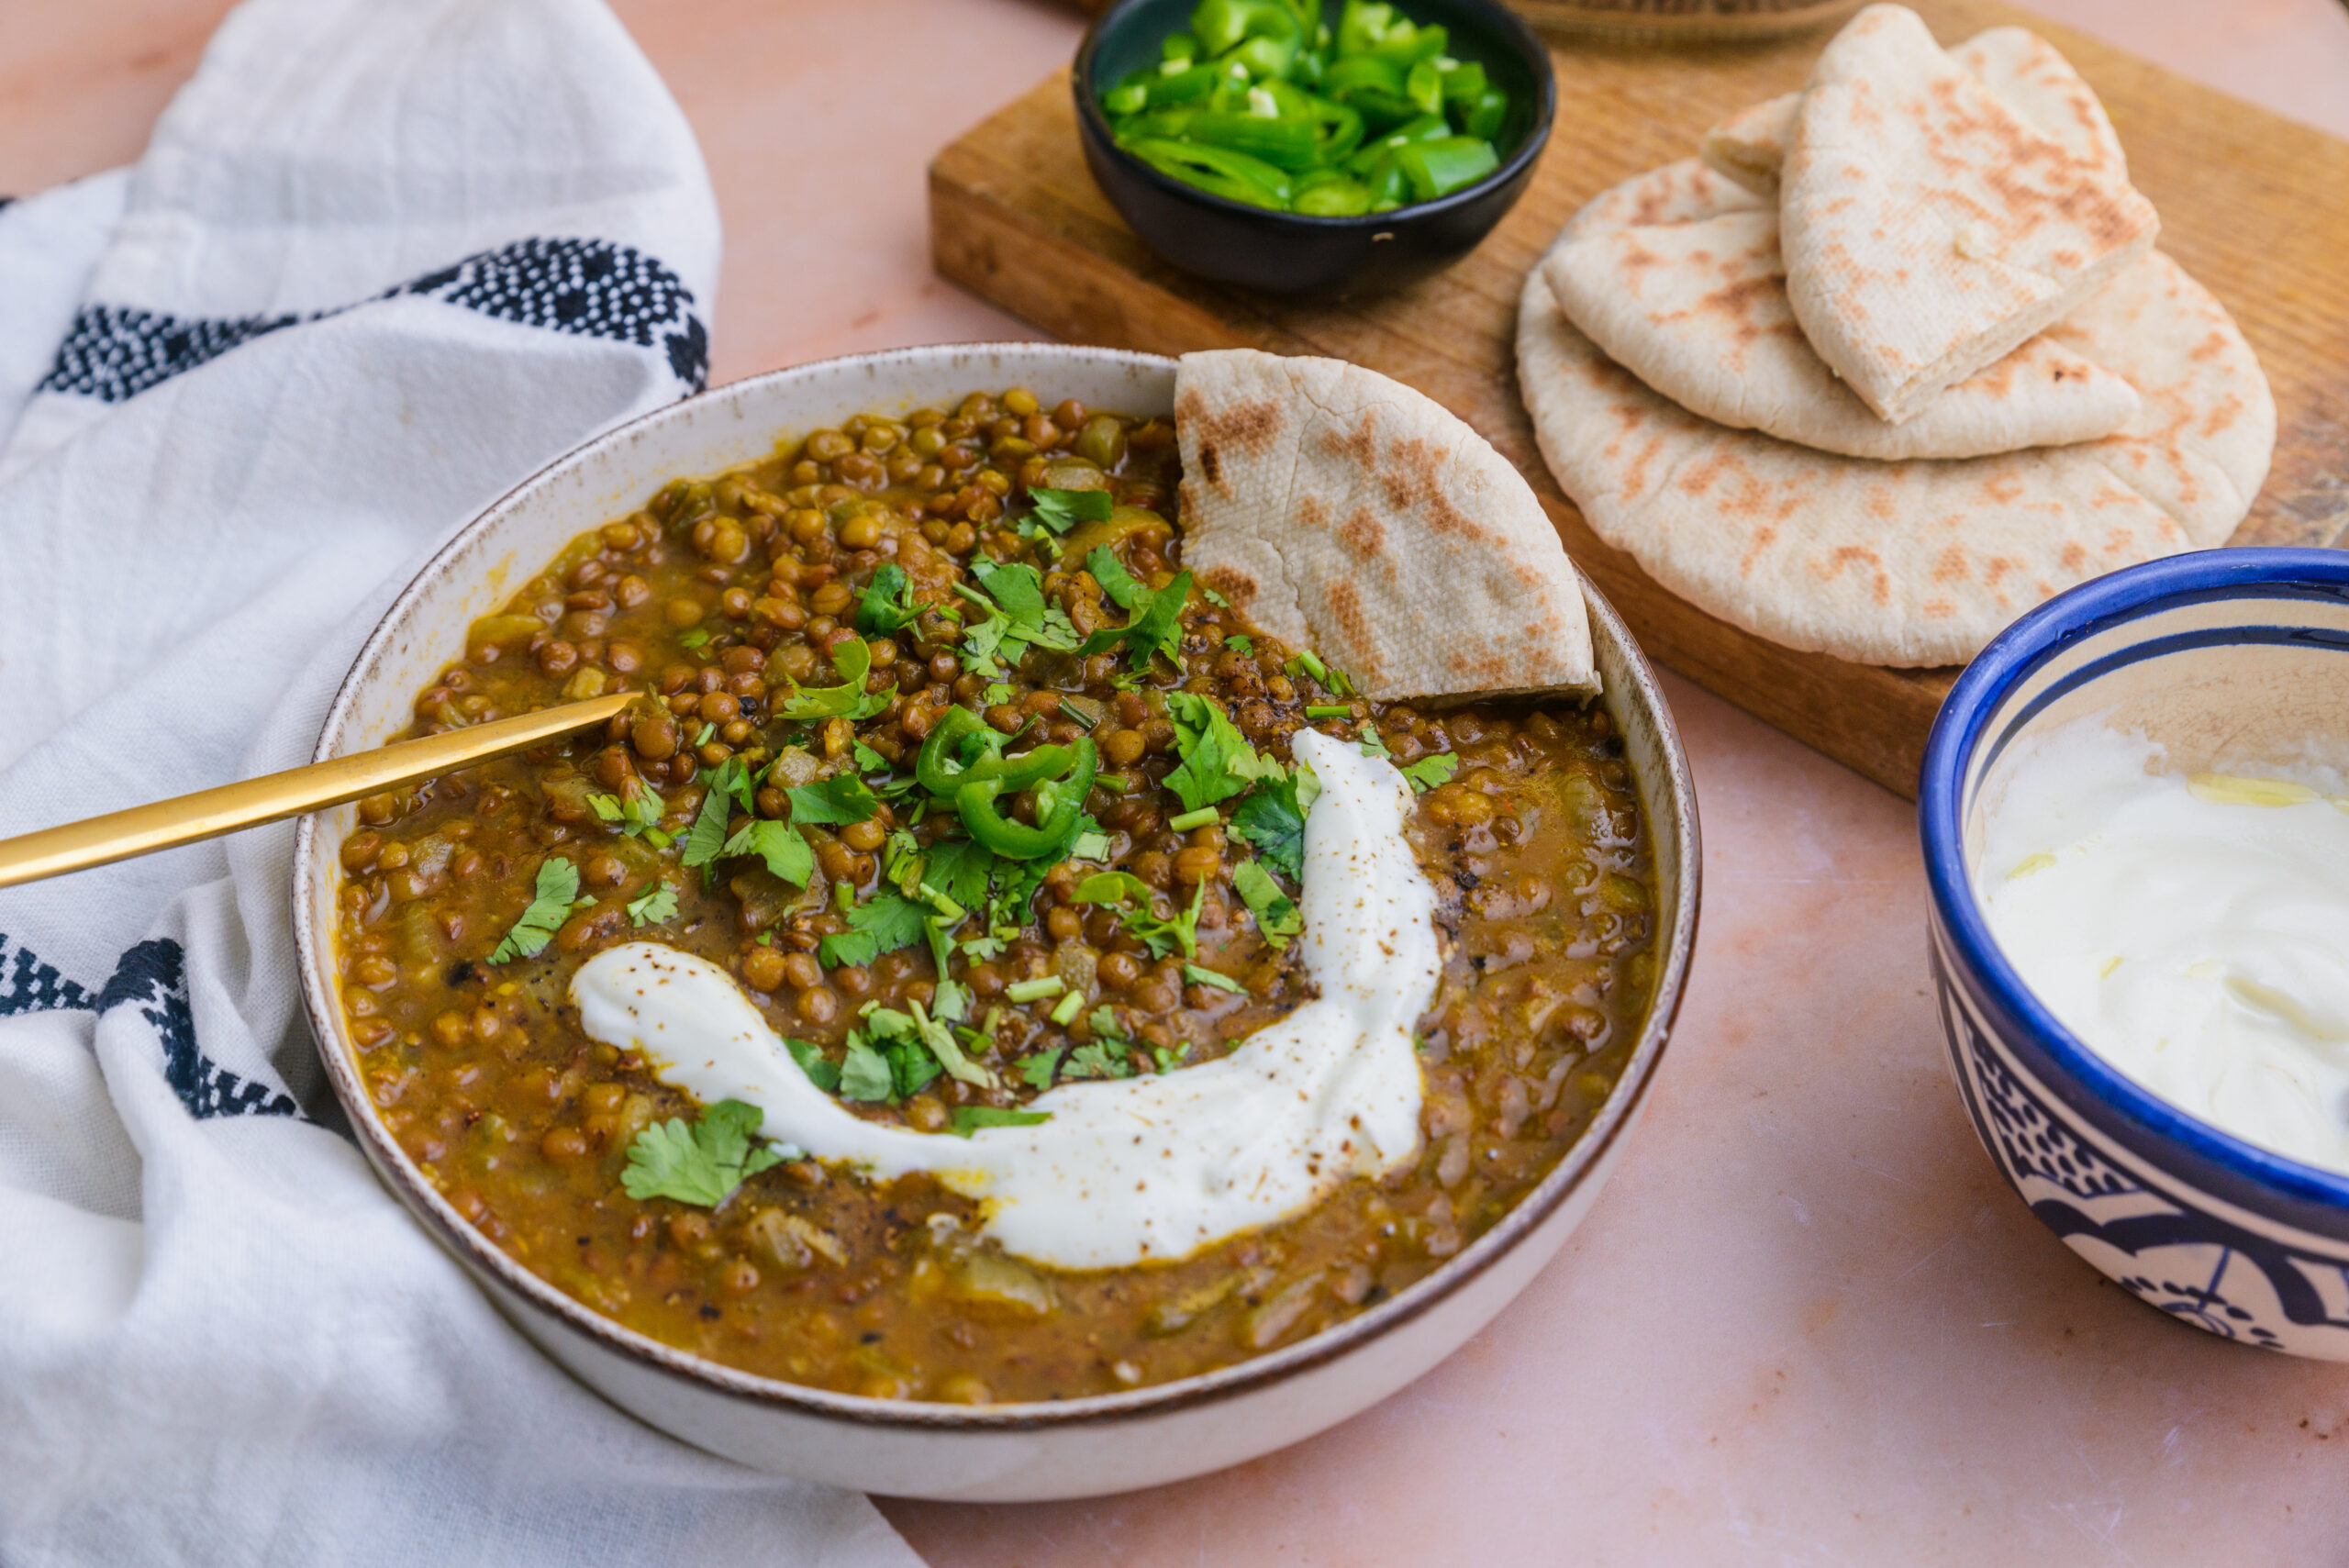 Yemeni Lentil Soup with bread and toppings